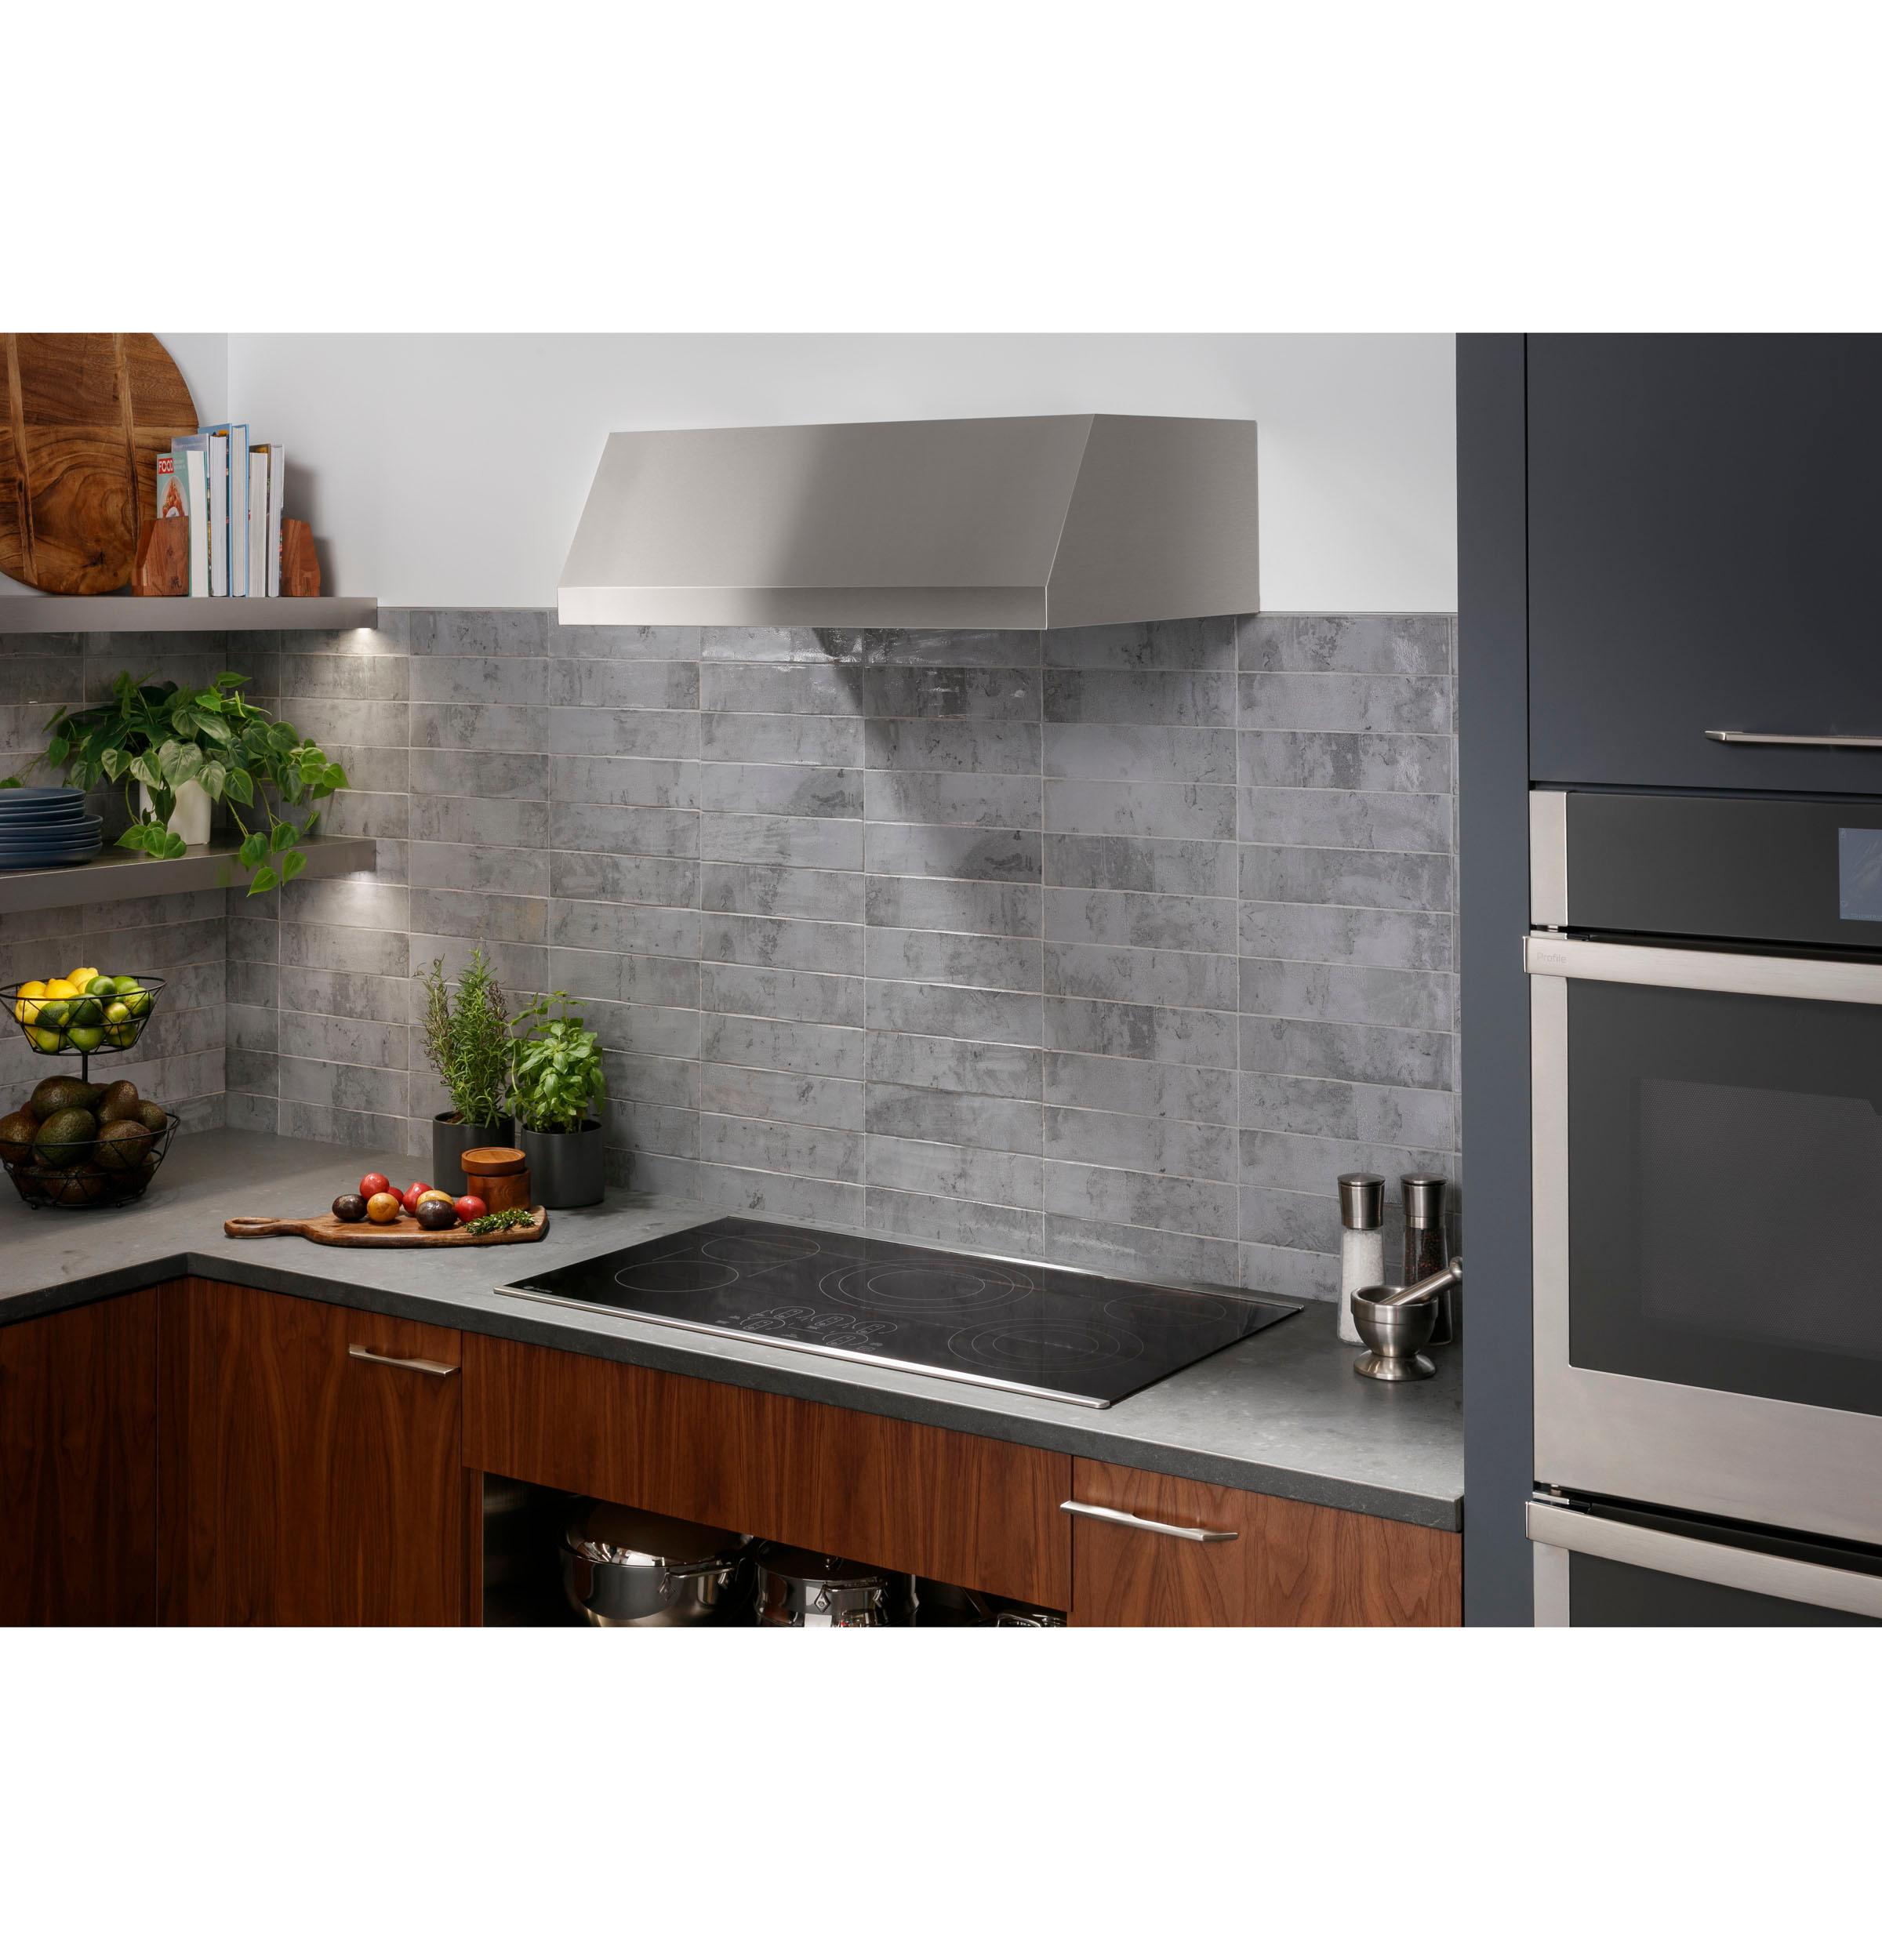 GE Profile™ 30" Built-In Touch Control Electric Cooktop